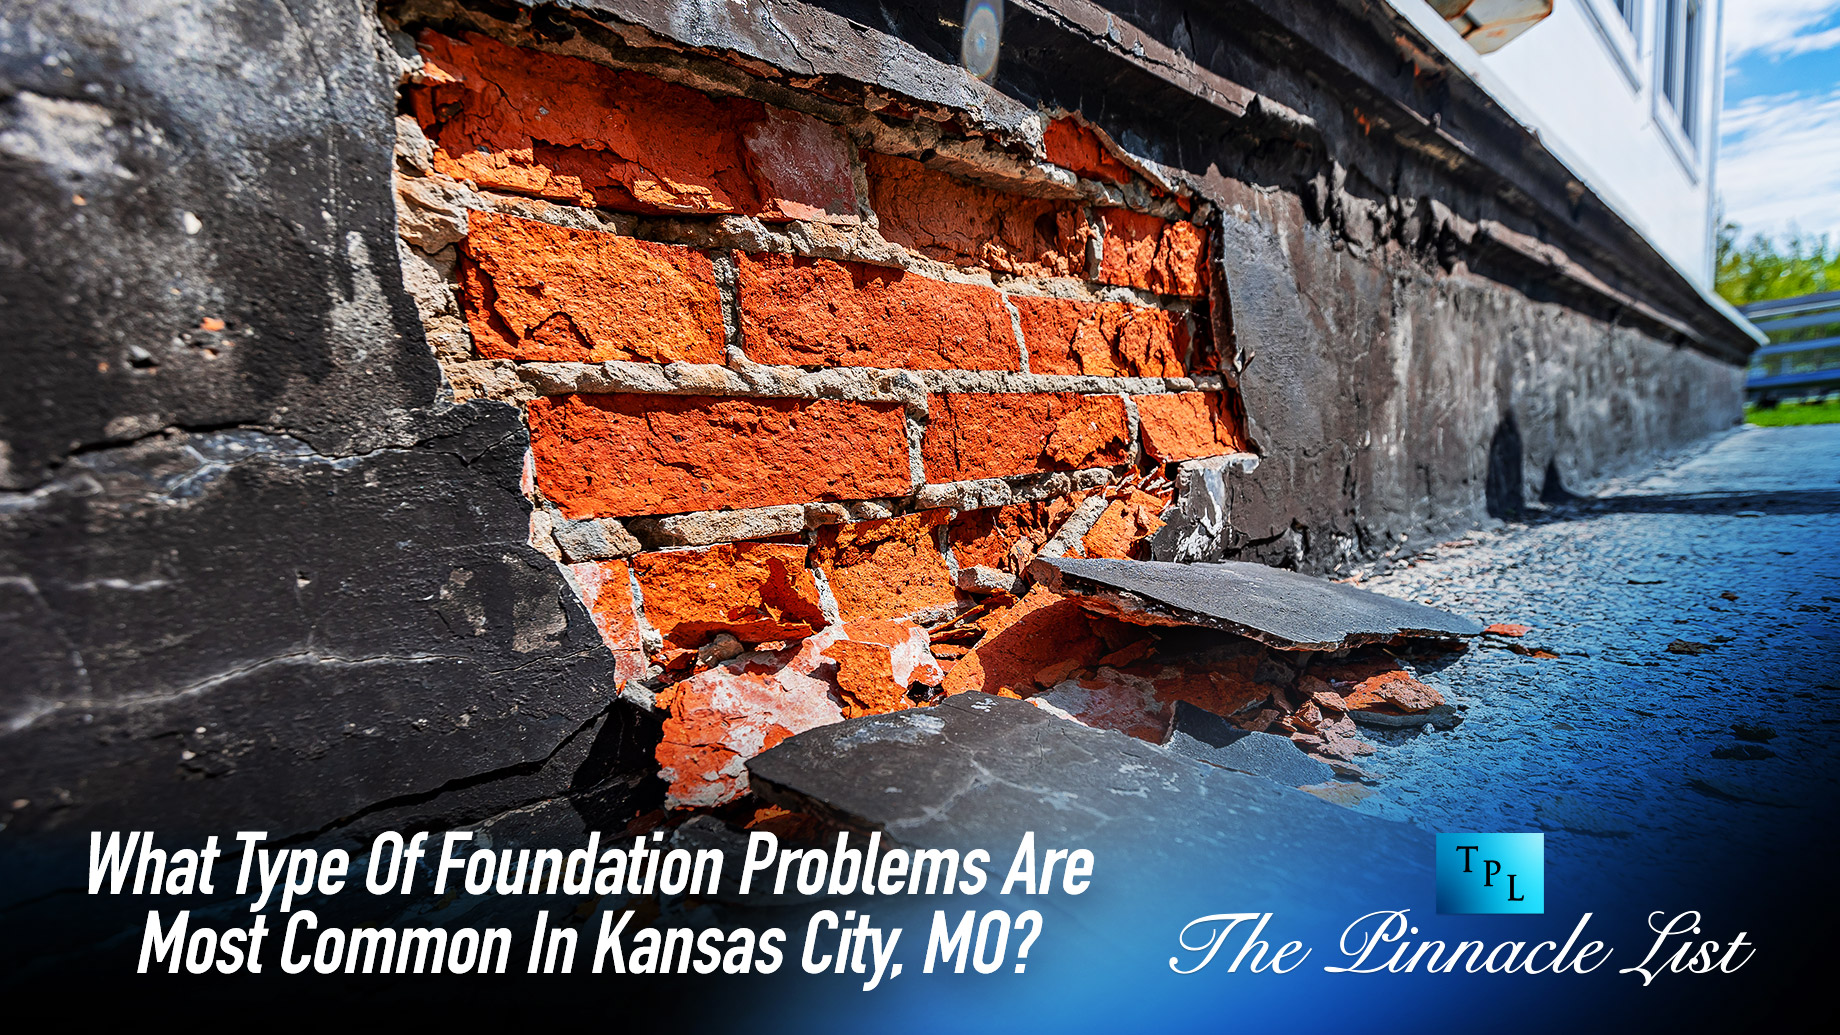 What Type Of Foundation Problems Are Most Common In Kansas City, MO?